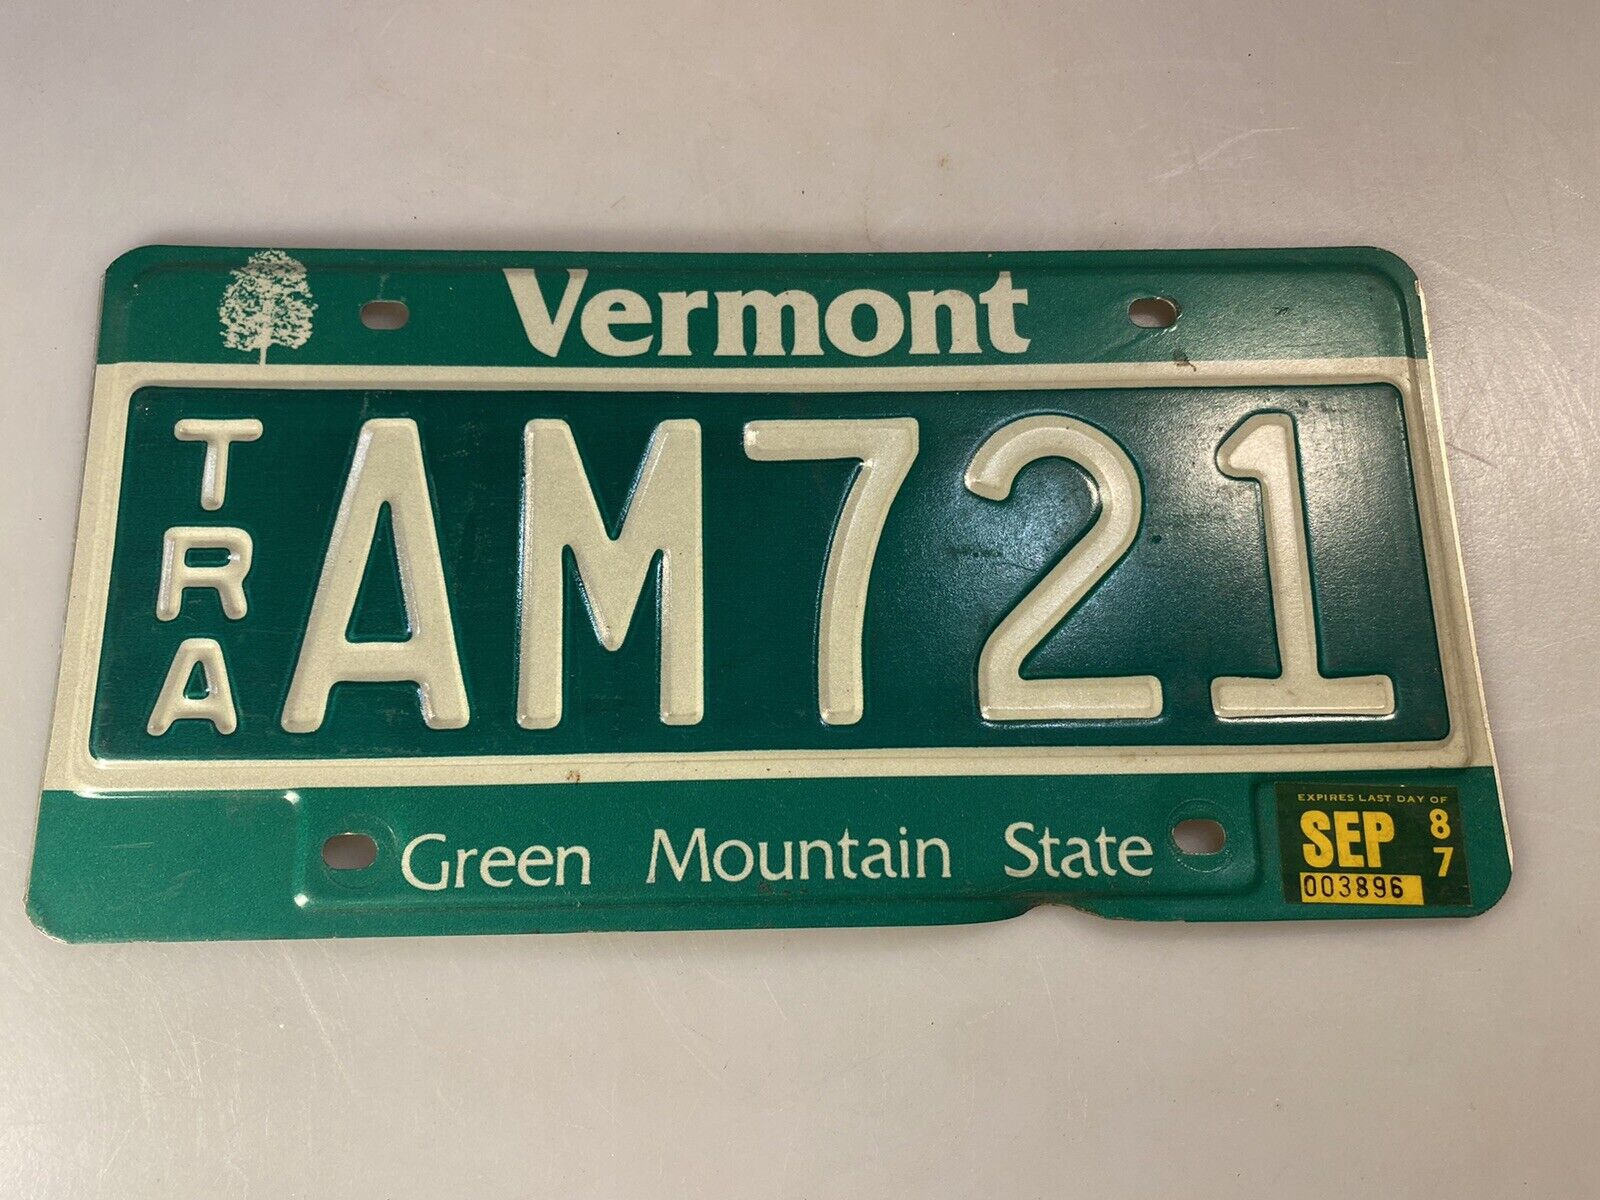 Vintage Vermont “green Mountain State” Tra License Plate Am721